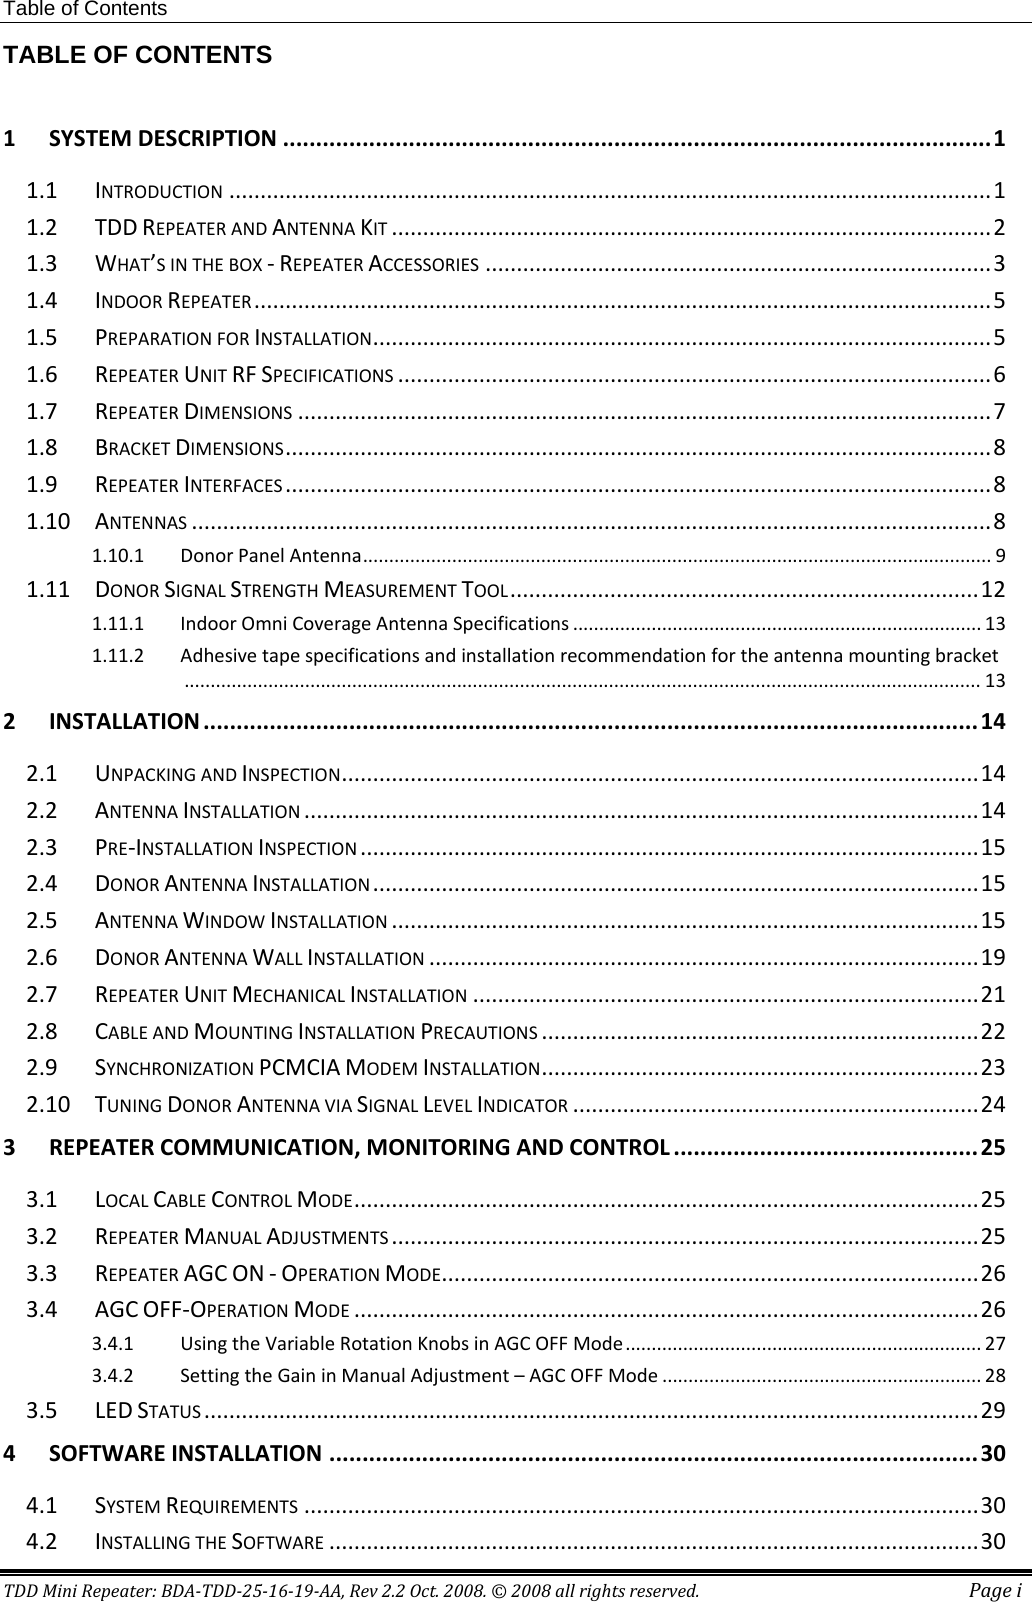 Table of Contents TDD Mini Repeater: BDA-TDD-25-16-19-AA, Rev 2.2 Oct. 2008. © 2008 all rights reserved. Page i TABLE OF CONTENTS  1 SYSTEM DESCRIPTION ........................................................................................................... 1 1.1 INTRODUCTION .......................................................................................................................... 1 1.2 TDD REPEATER AND ANTENNA KIT ................................................................................................ 2 1.3 WHAT’S IN THE BOX - REPEATER ACCESSORIES ................................................................................. 3 1.4 INDOOR REPEATER ...................................................................................................................... 5 1.5 PREPARATION FOR INSTALLATION ................................................................................................... 5 1.6 REPEATER UNIT RF SPECIFICATIONS ............................................................................................... 6 1.7 REPEATER DIMENSIONS ............................................................................................................... 7 1.8 BRACKET DIMENSIONS ................................................................................................................. 8 1.9 REPEATER INTERFACES ................................................................................................................. 8 1.10 ANTENNAS ................................................................................................................................ 8 1.10.1 Donor Panel Antenna ........................................................................................................................ 9 1.11 DONOR SIGNAL STRENGTH MEASUREMENT TOOL ........................................................................... 12 1.11.1 Indoor Omni Coverage Antenna Specifications .............................................................................. 13 1.11.2 Adhesive tape specifications and installation recommendation for the antenna mounting bracket ........................................................................................................................................................ 13 2 INSTALLATION ..................................................................................................................... 14 2.1 UNPACKING AND INSPECTION ...................................................................................................... 14 2.2 ANTENNA INSTALLATION ............................................................................................................ 14 2.3 PRE-INSTALLATION INSPECTION ................................................................................................... 15 2.4 DONOR ANTENNA INSTALLATION ................................................................................................. 15 2.5 ANTENNA WINDOW INSTALLATION .............................................................................................. 15 2.6 DONOR ANTENNA WALL INSTALLATION ........................................................................................ 19 2.7 REPEATER UNIT MECHANICAL INSTALLATION ................................................................................. 21 2.8 CABLE AND MOUNTING INSTALLATION PRECAUTIONS ...................................................................... 22 2.9 SYNCHRONIZATION PCMCIA MODEM INSTALLATION ...................................................................... 23 2.10 TUNING DONOR ANTENNA VIA SIGNAL LEVEL INDICATOR ................................................................. 24 3 REPEATER COMMUNICATION, MONITORING AND CONTROL .............................................. 25 3.1 LOCAL CABLE CONTROL MODE .................................................................................................... 25 3.2 REPEATER MANUAL ADJUSTMENTS .............................................................................................. 25 3.3 REPEATER AGC ON - OPERATION MODE ...................................................................................... 26 3.4 AGC OFF-OPERATION MODE .................................................................................................... 26 3.4.1 Using the Variable Rotation Knobs in AGC OFF Mode .................................................................... 27 3.4.2 Setting the Gain in Manual Adjustment – AGC OFF Mode ............................................................. 28 3.5 LED STATUS ............................................................................................................................ 29 4 SOFTWARE INSTALLATION .................................................................................................. 30 4.1 SYSTEM REQUIREMENTS ............................................................................................................ 30 4.2 INSTALLING THE SOFTWARE ........................................................................................................ 30 